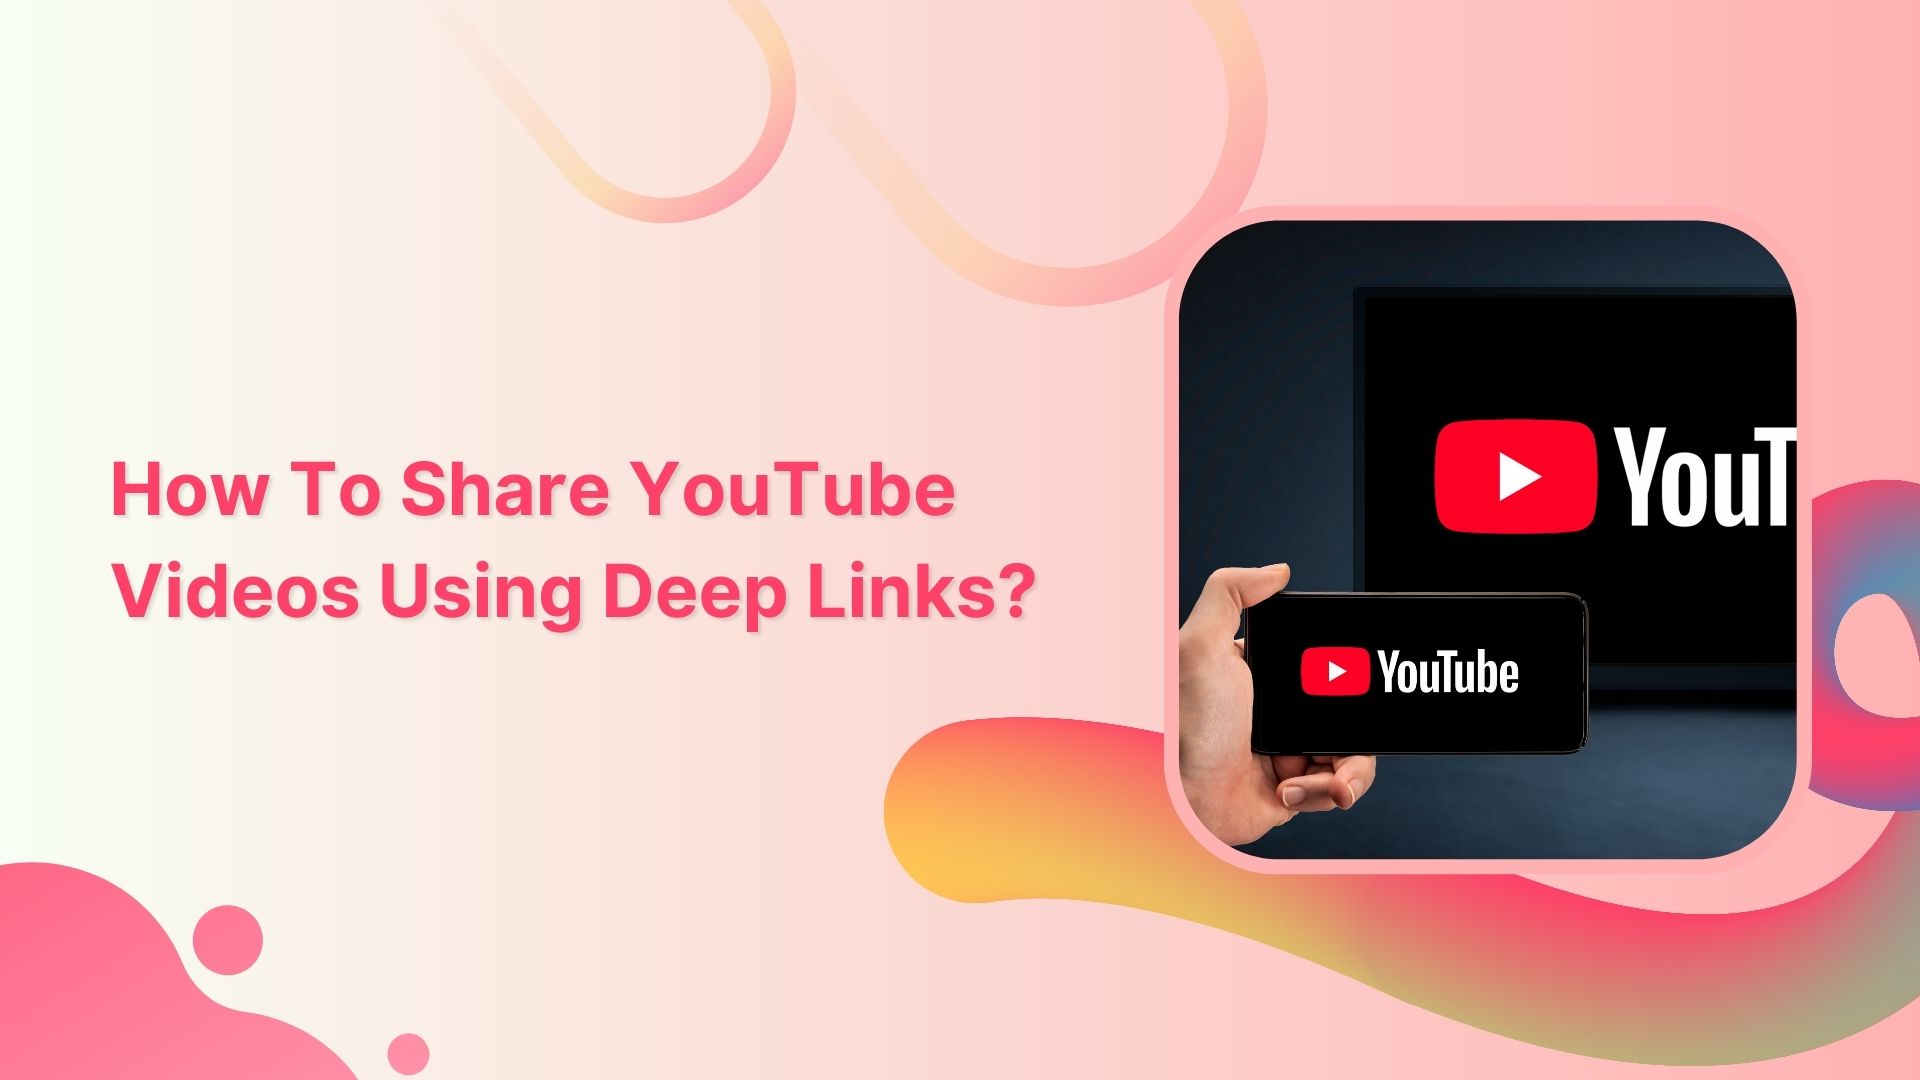 How to share YouTube videos using deep links?